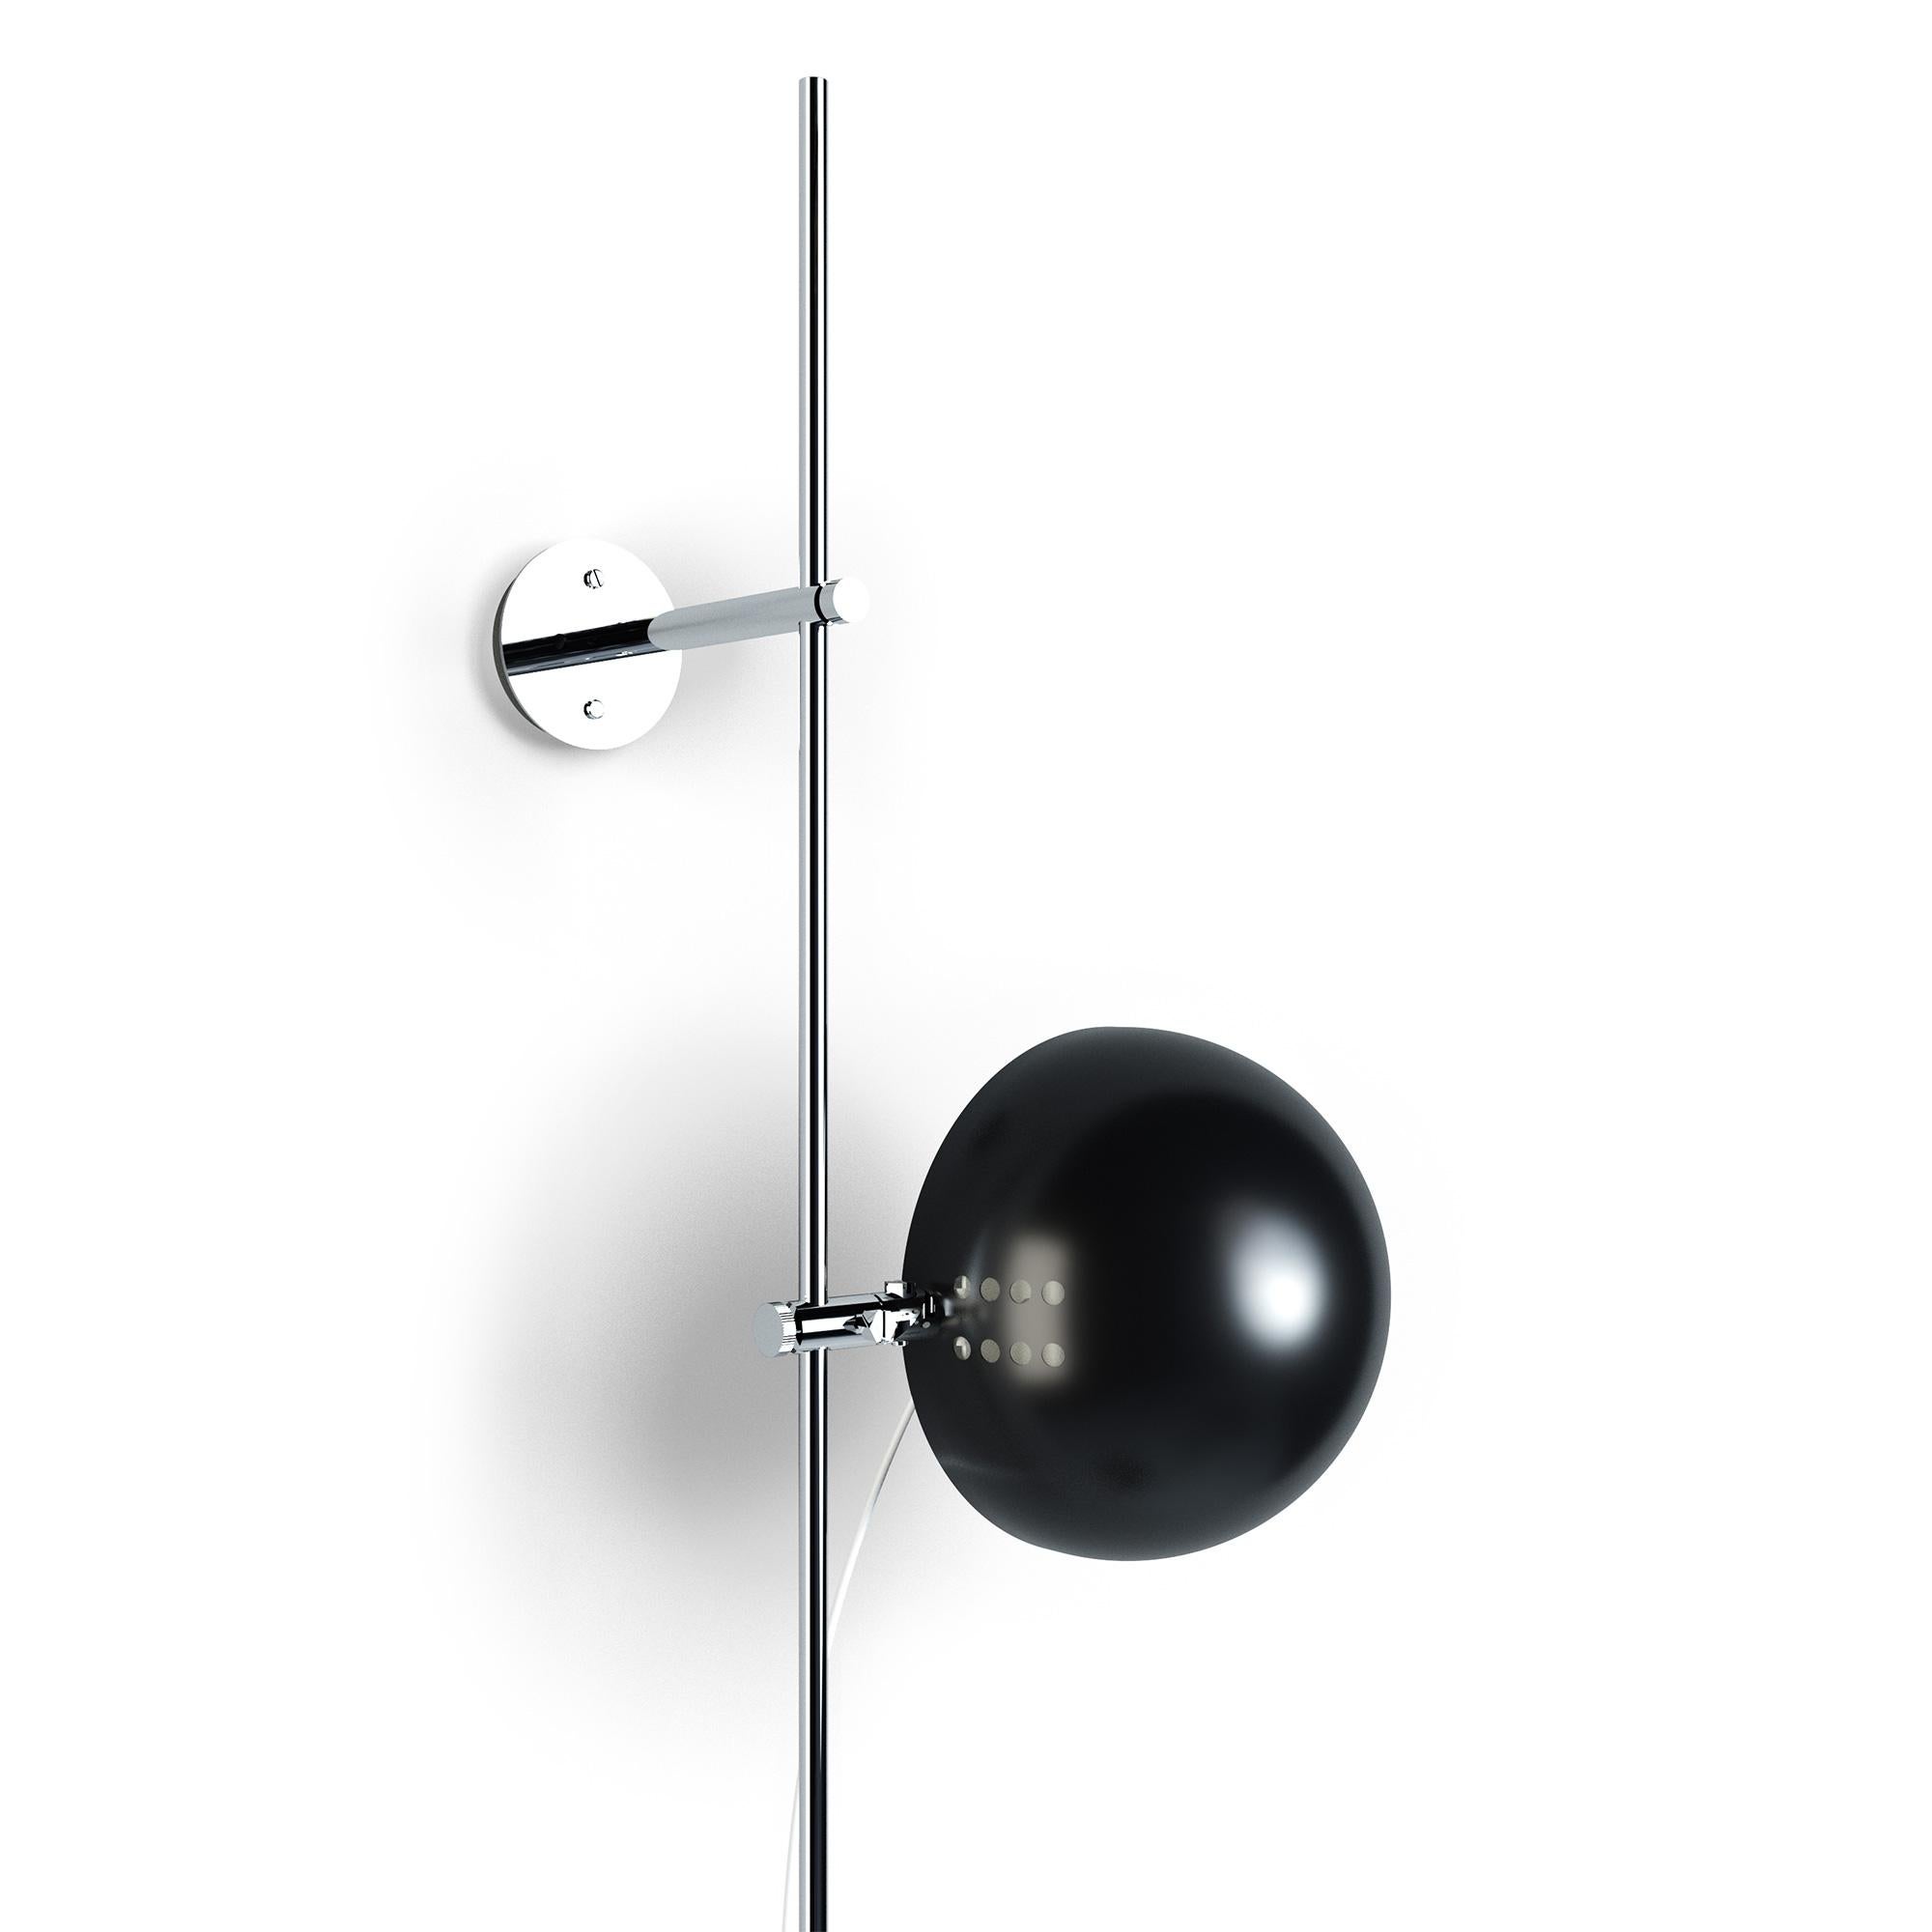 A24-1500 Wall Lamp by Disderot
Limited Edition. 
Designed by Alain Richard
Dimensions: Ø 30 x H 150 cm.
Materials: Lacquered metal.

Delivered with authentication certificate. Made in France. Available in different colored metal options. Custom